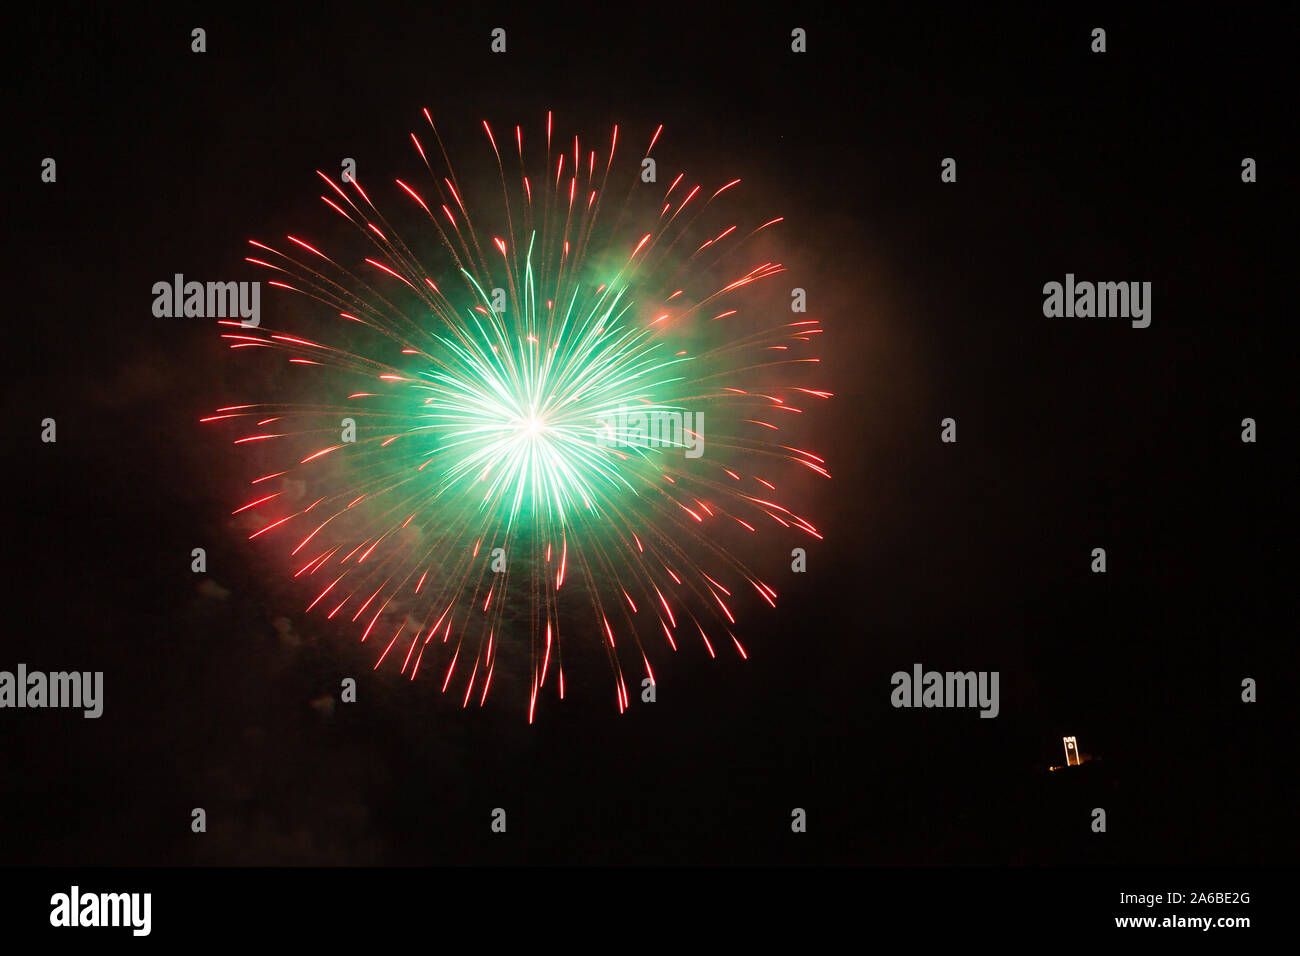 Awesome red, white and green fireworks above a illuminated church Stock Photo